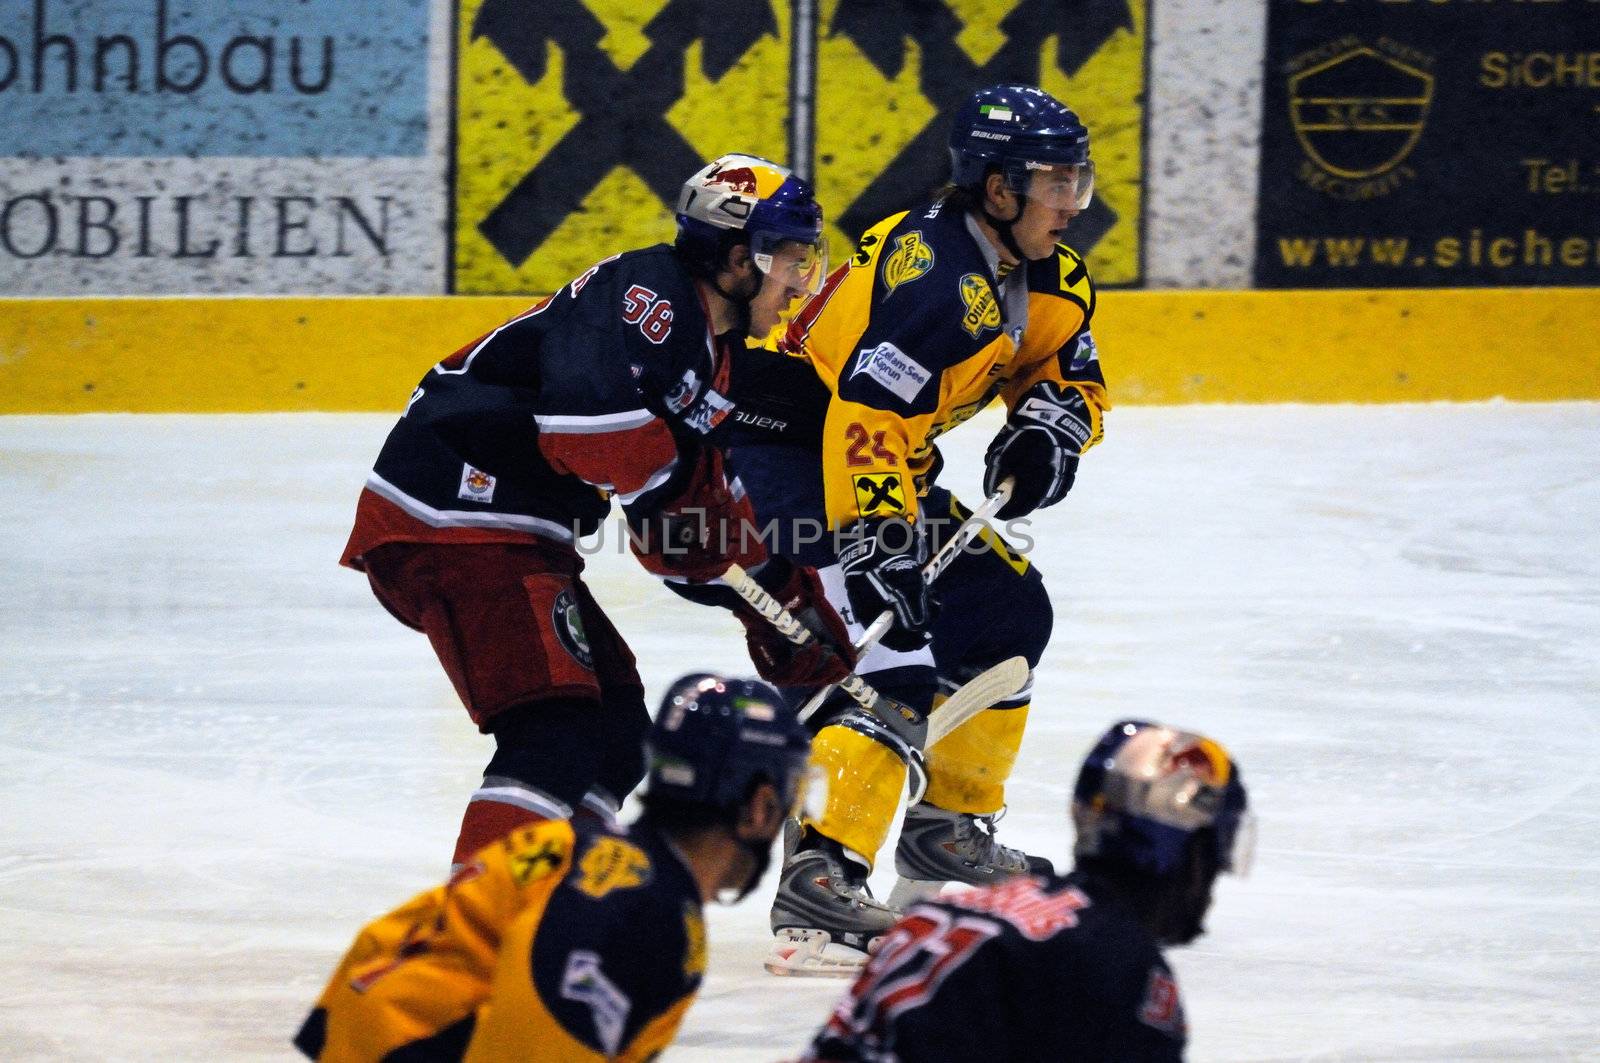 ZELL AM SEE, AUSTRIA - DECEMBER 7: Austrian National League. Battle for the puck in the neutral zone. Game EK Zell am See vs. Red Bulls Salzburg (Result 4-6) on December 7, 2010, at hockey rink of Zell am See